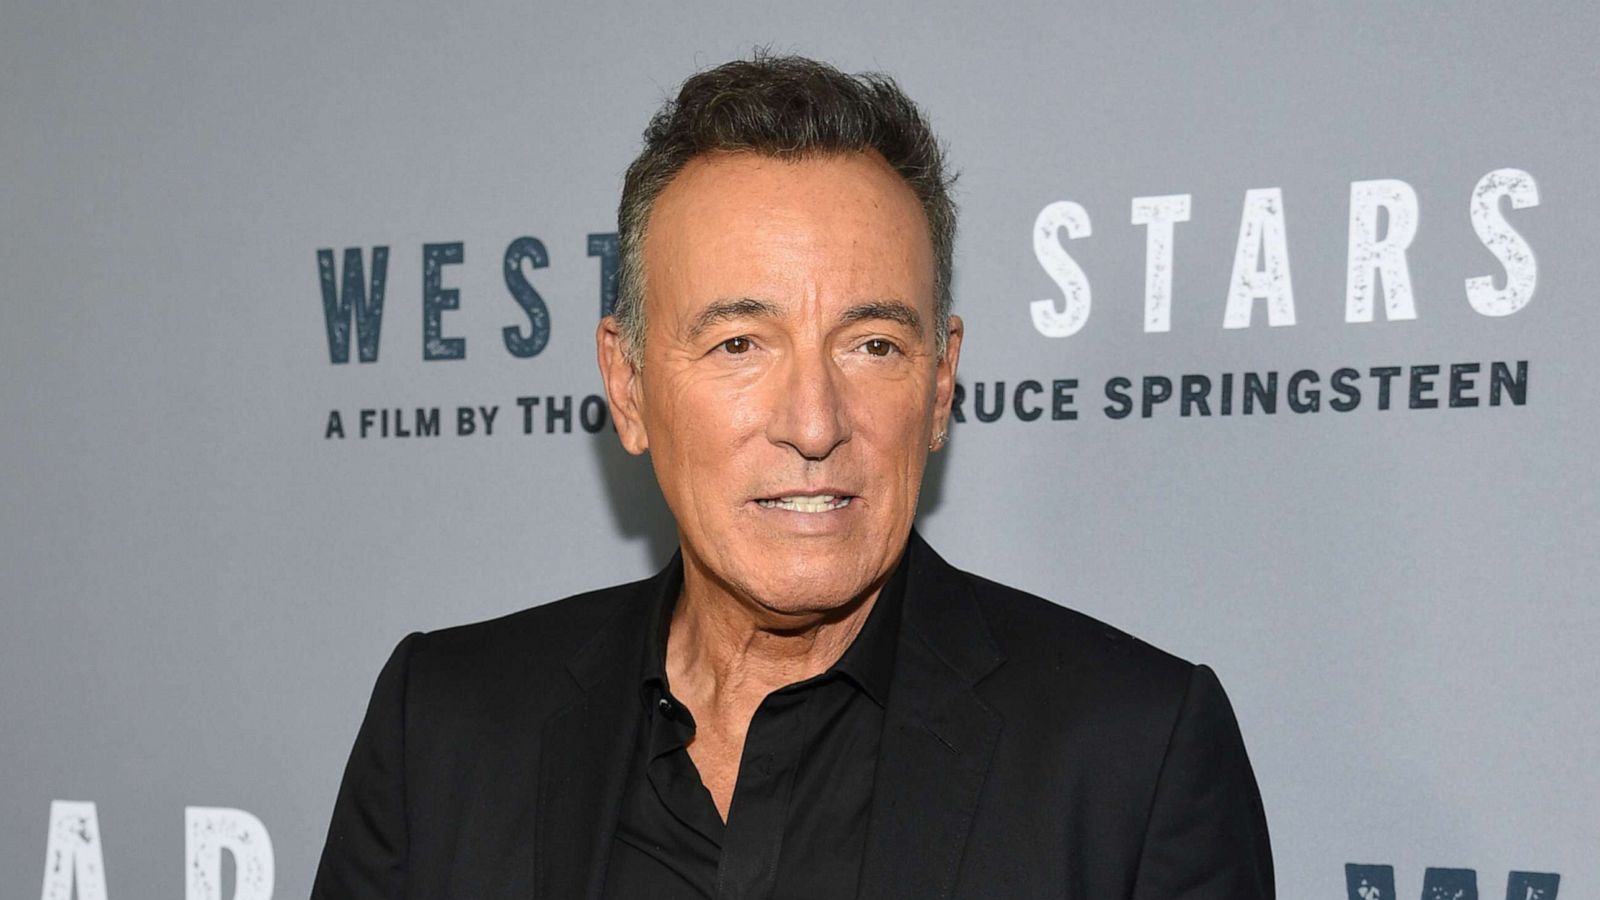 PHOTO: Singer-songwriter Bruce Springsteen attends the special screening of "Western Stars" at Metrograph, Oct. 16, 2019, in N.Y.